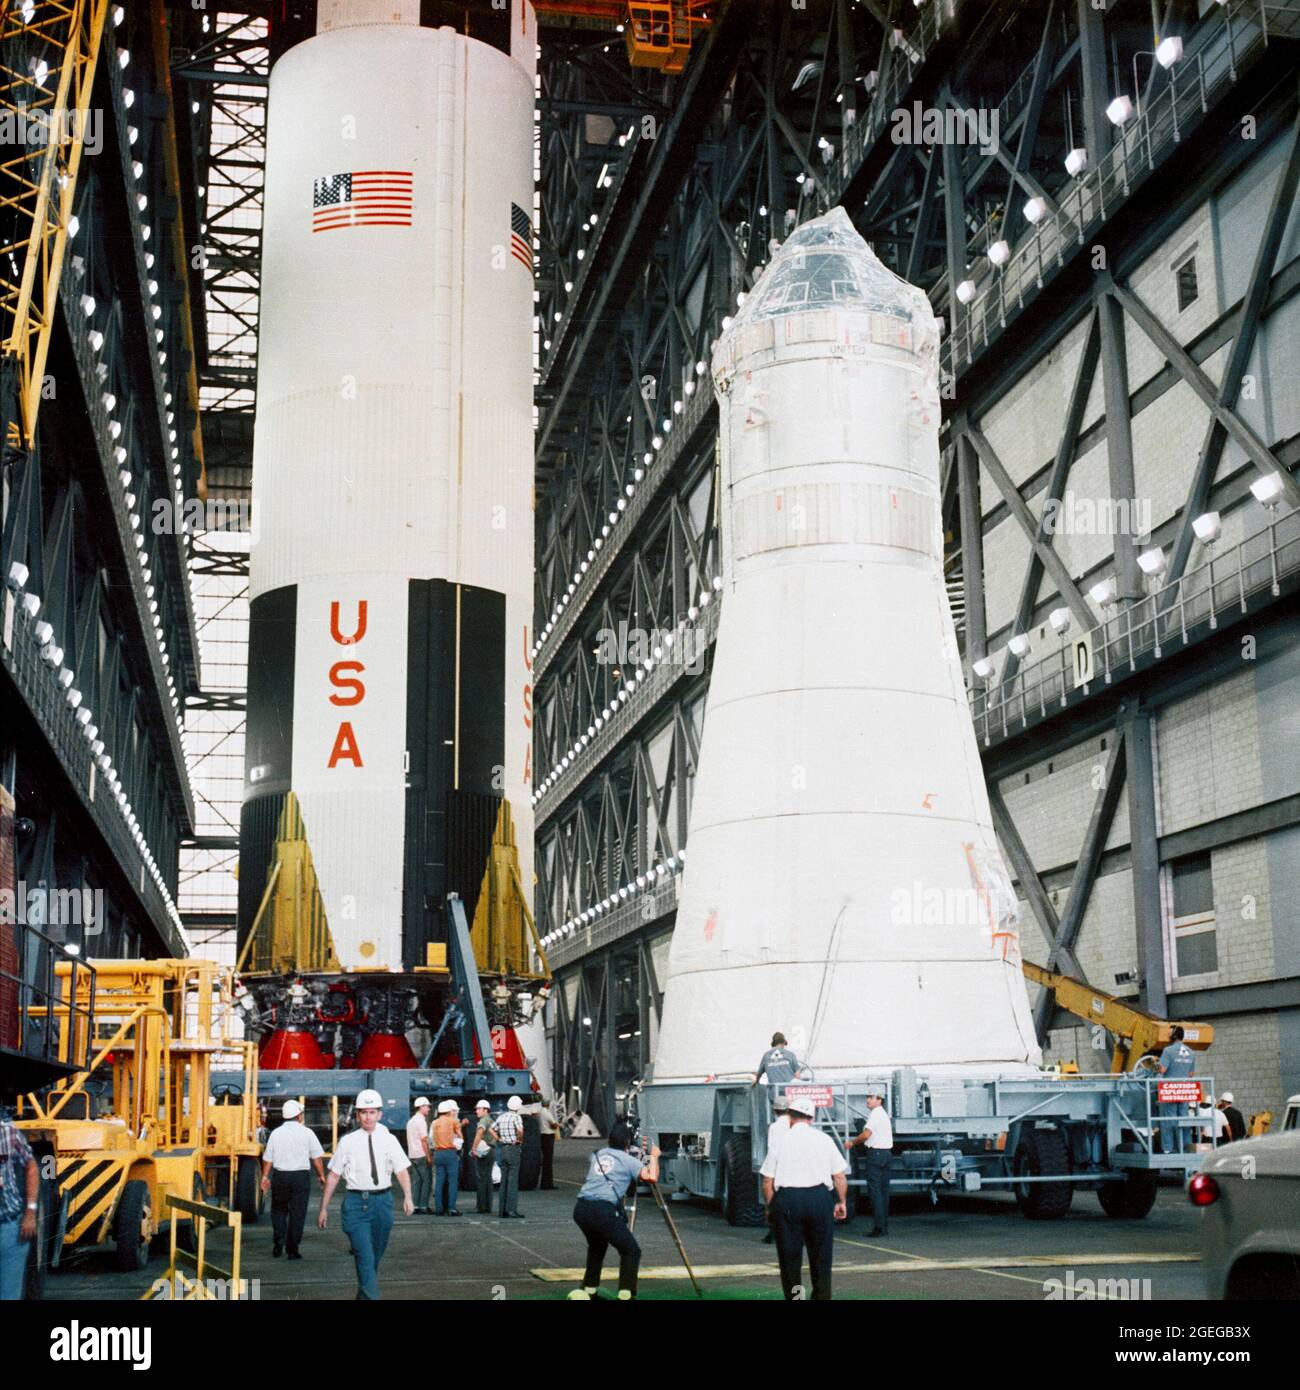 Apollo Spacecraft 104 Command/Service Module and Lunar Module 3 arrive at the Vehicle Assembly Building (VAB) for mating atop the Saturn 504 launch vehicle. The Saturn 504 stack is out of view. The Saturn V first (S-IC) stage in left background is scheduled for a later flight Stock Photo